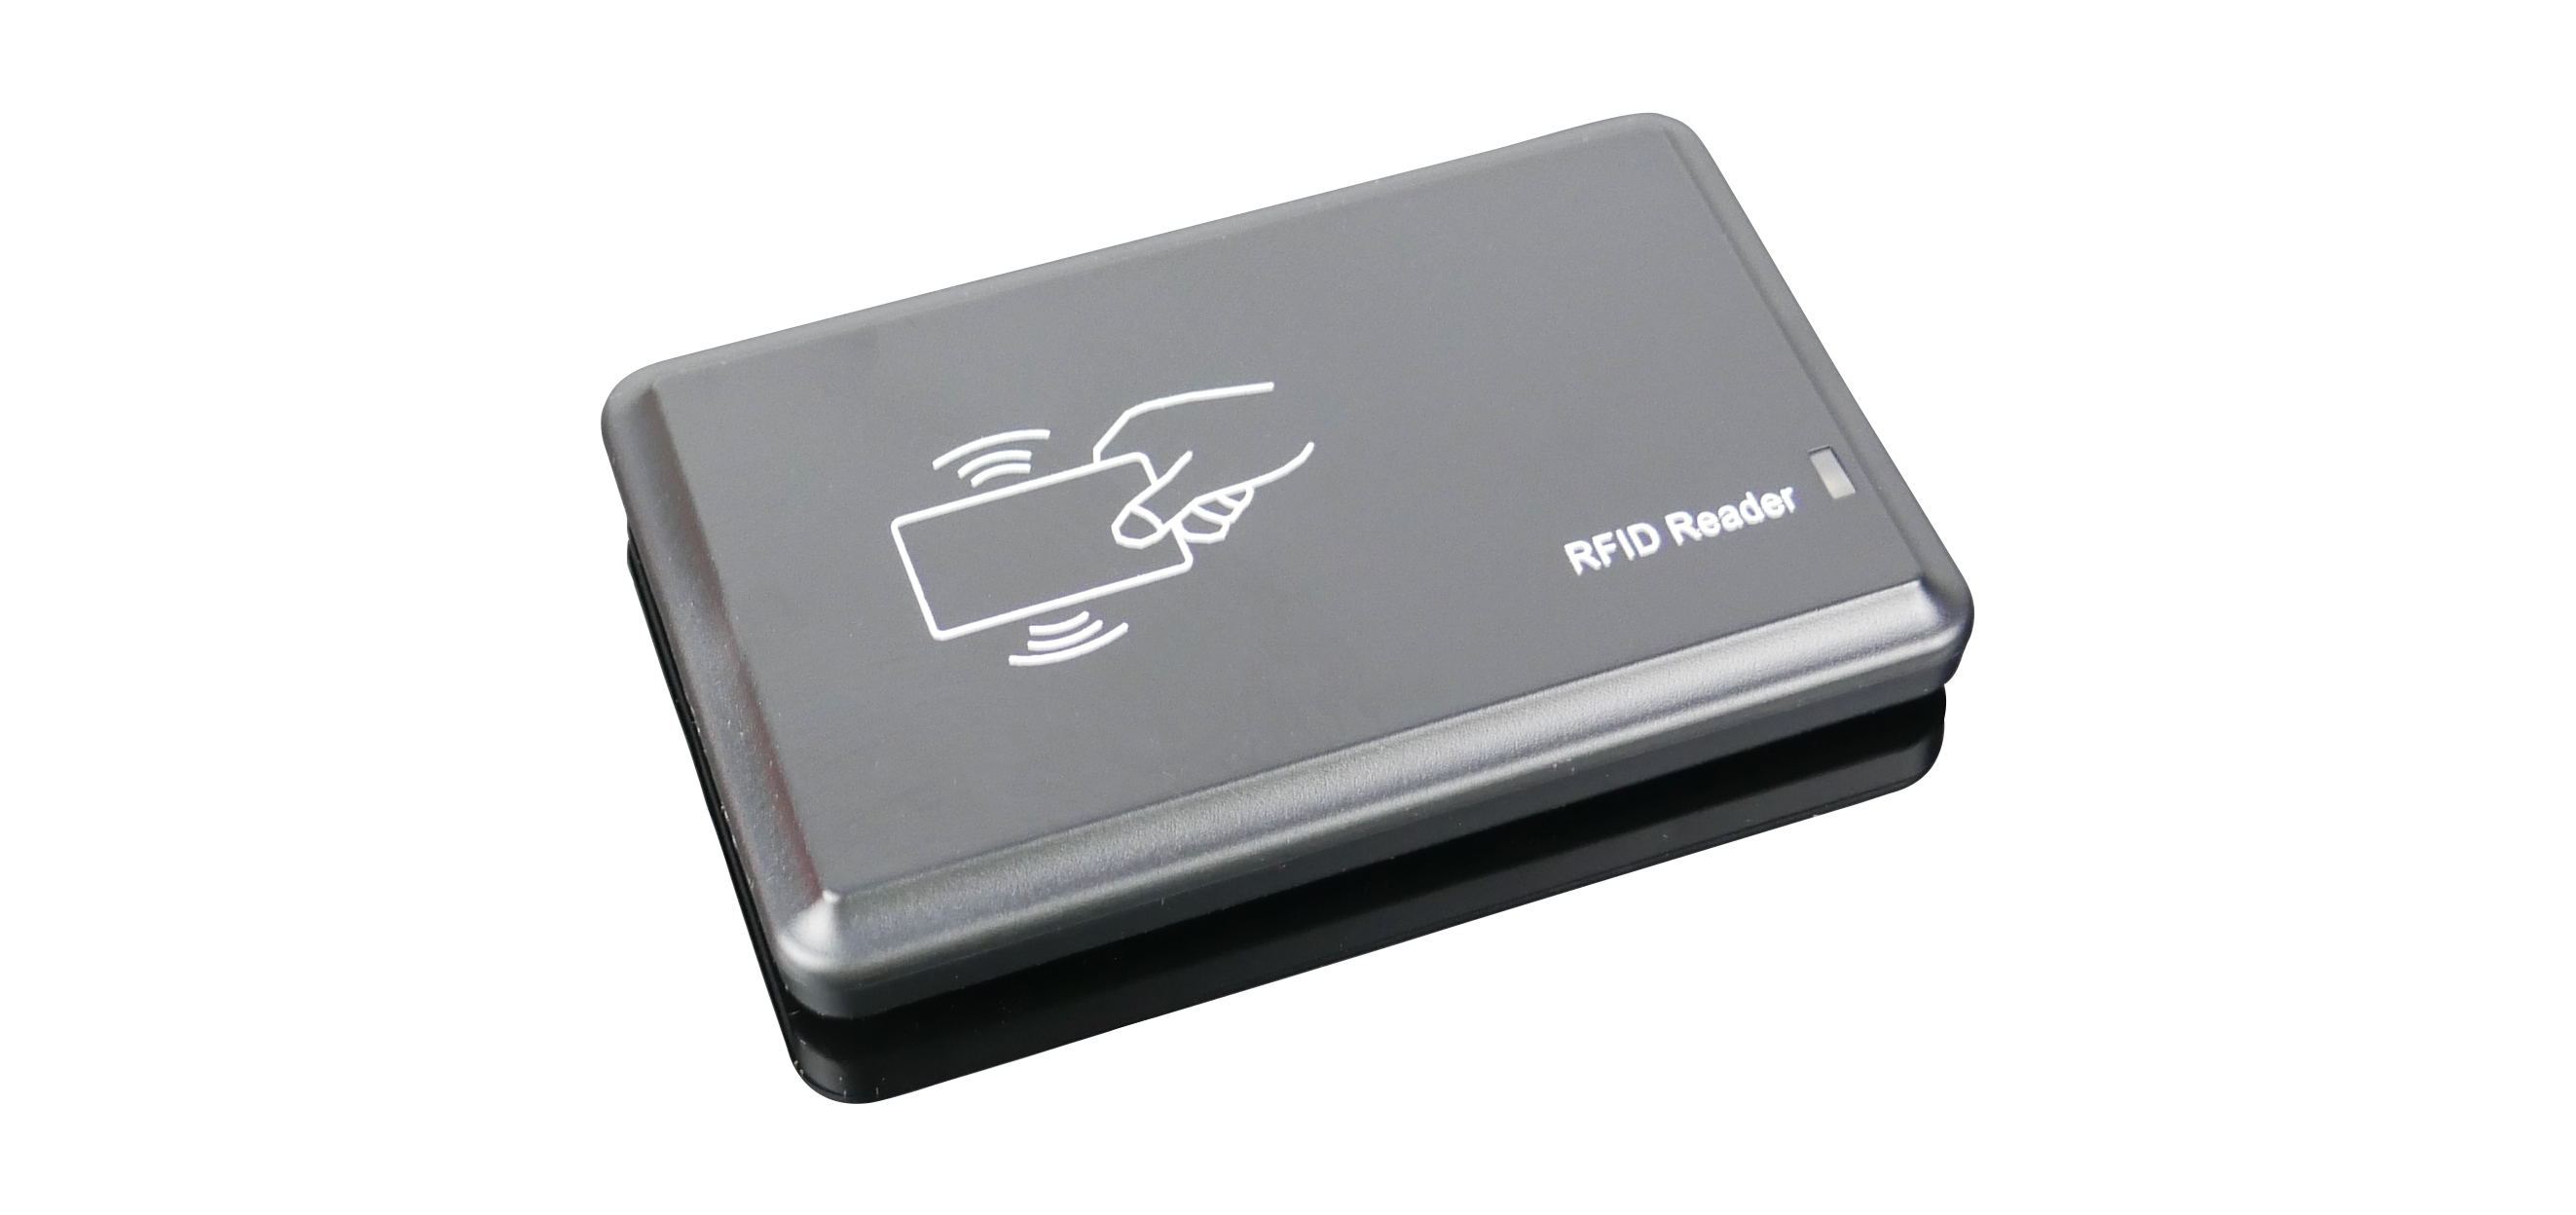 Wired HD-RD20X RFID tag reading device